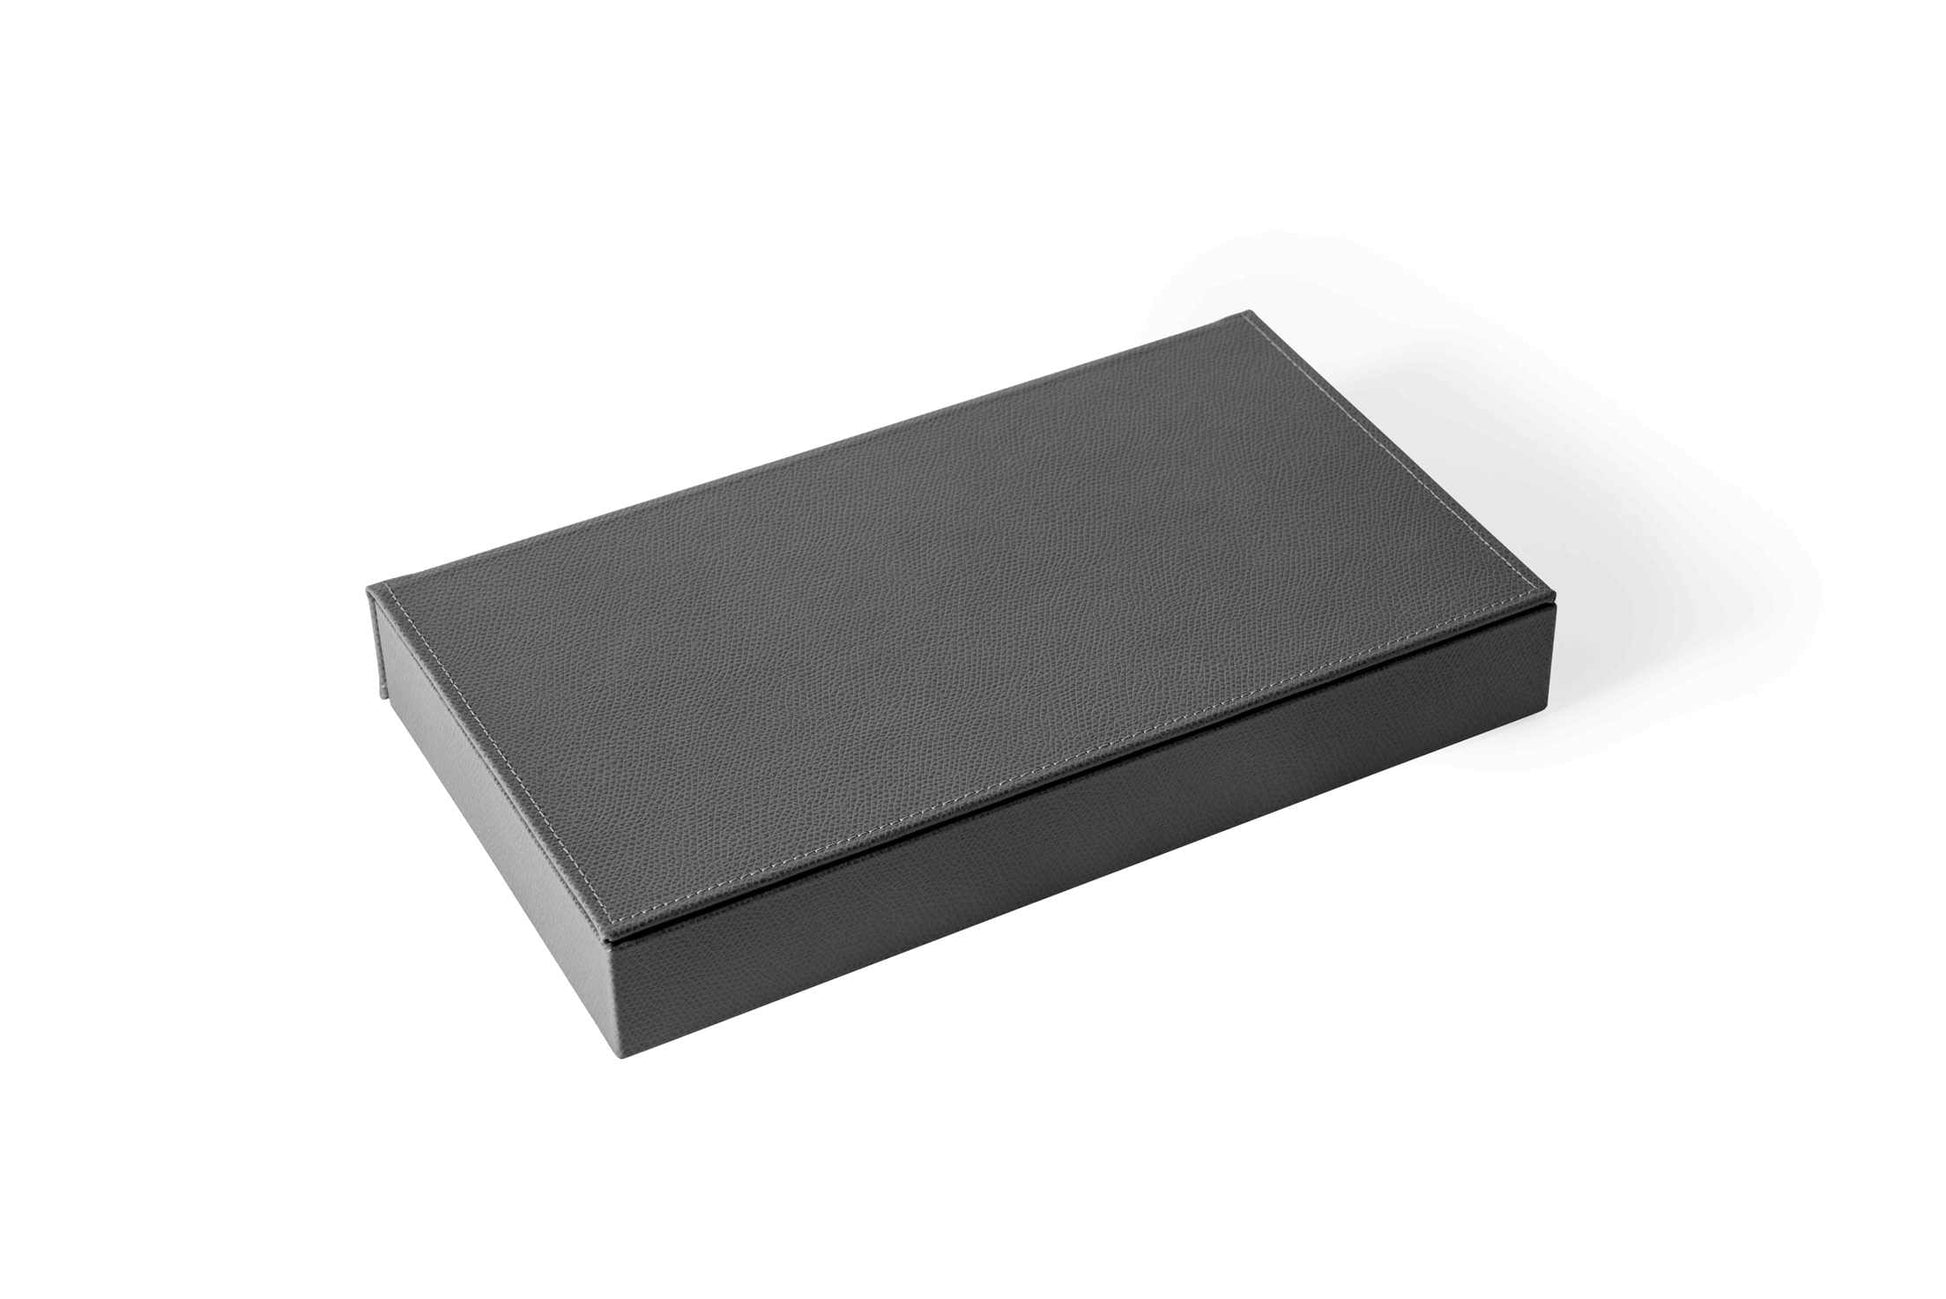 Pinetti Firenze Rectangular Leather-Covered Wood Trinket Box | Big rectangular trinket box with lid | Wood structure covered in leather | Explore Luxury Lifestyle Accessories at 2Jour Concierge, #1 luxury high-end gift & lifestyle shop